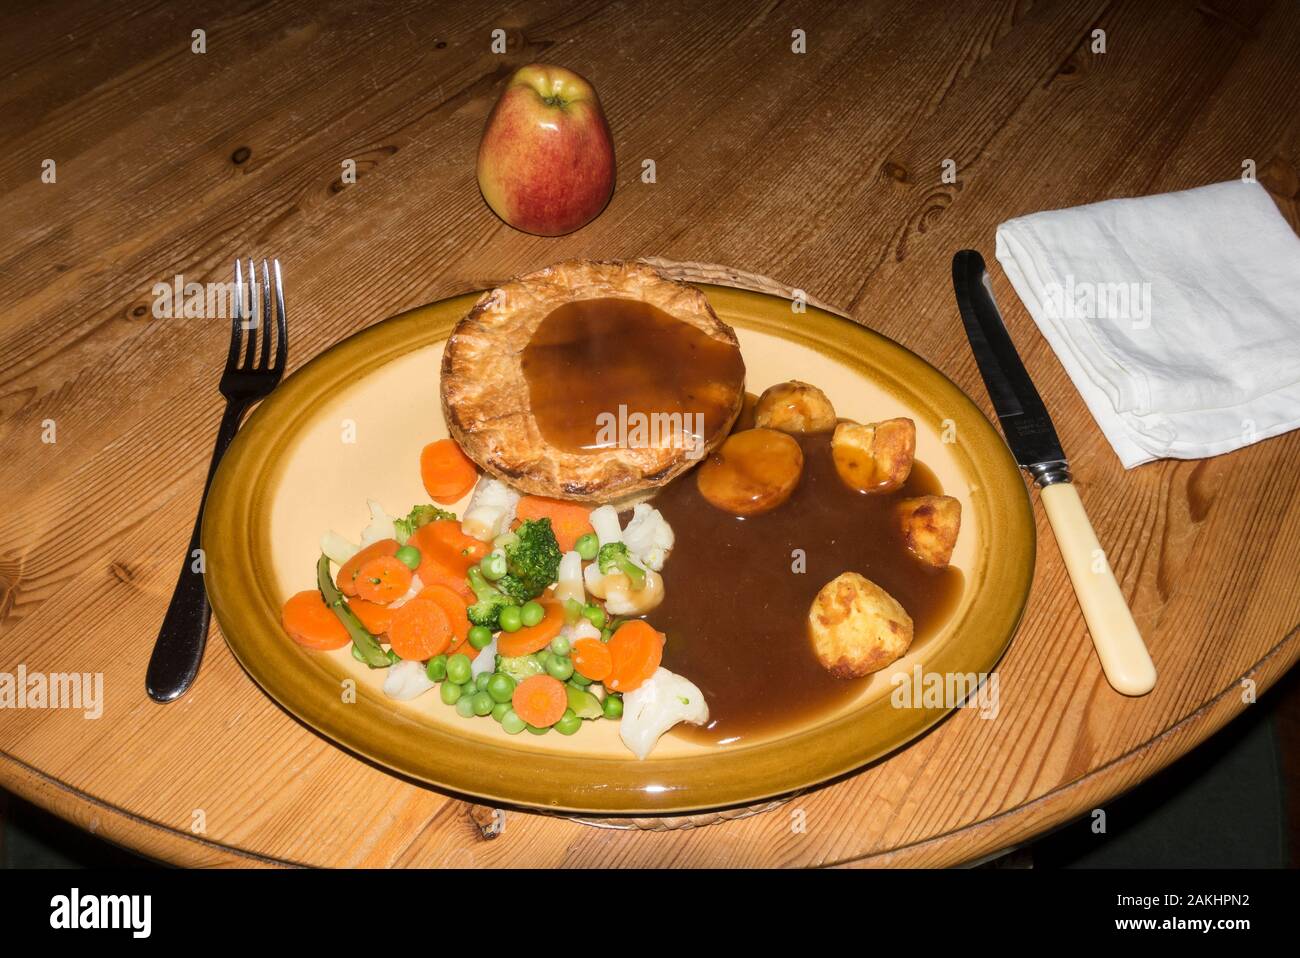 Chicken pie with roast potatoes and mixed veg main course Stock Photo